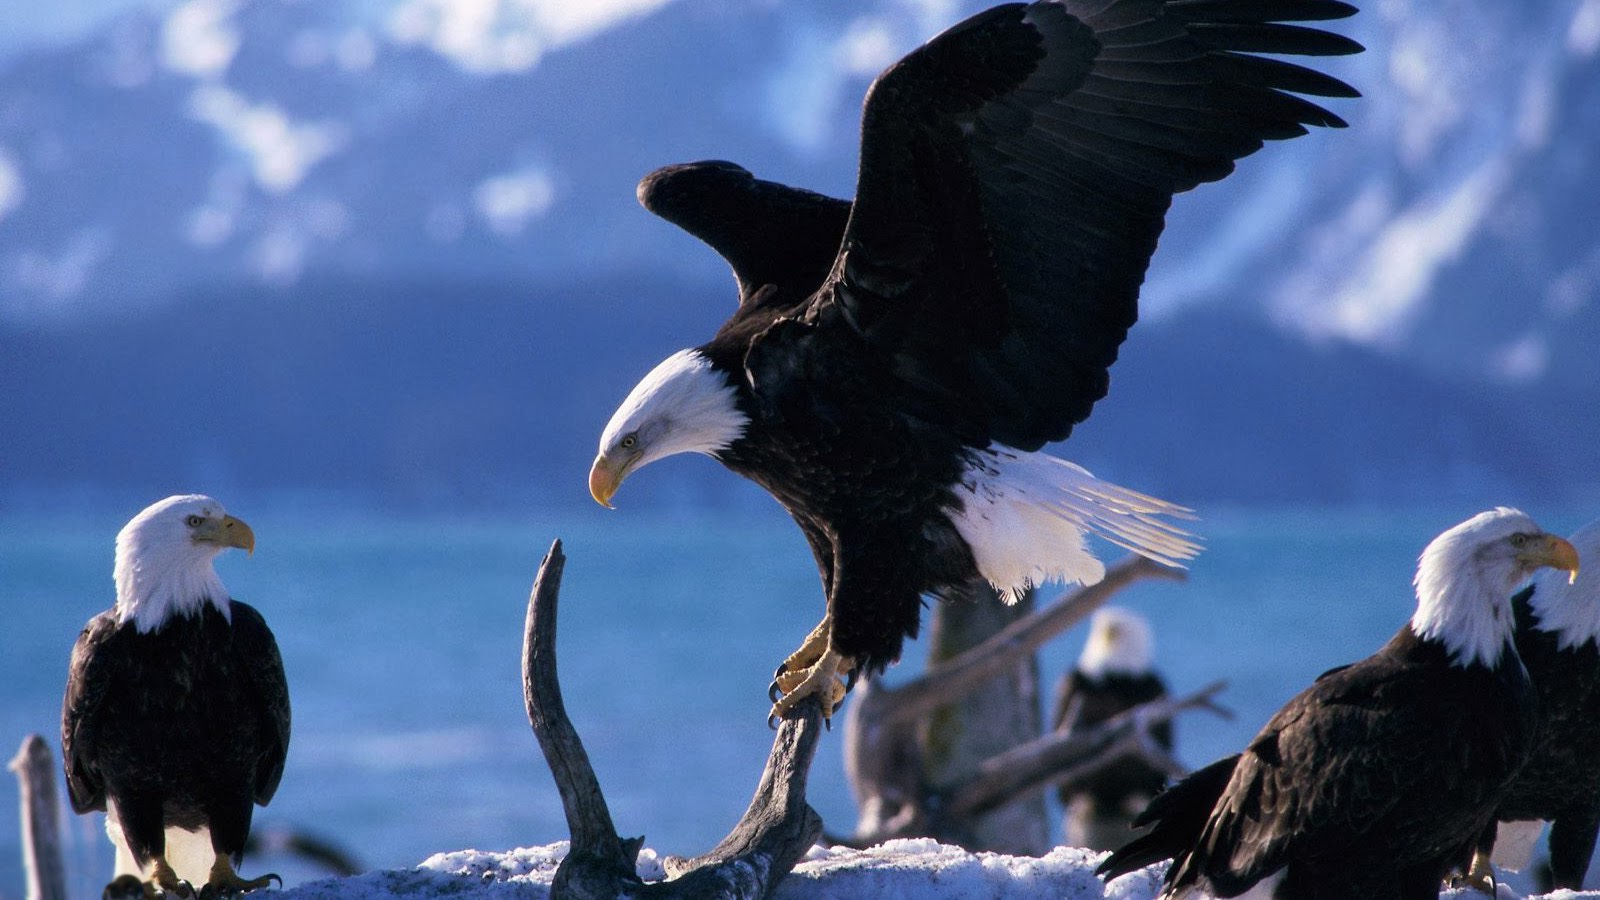  50 Free Eagle  Wallpapers  and Backgrounds  on WallpaperSafari